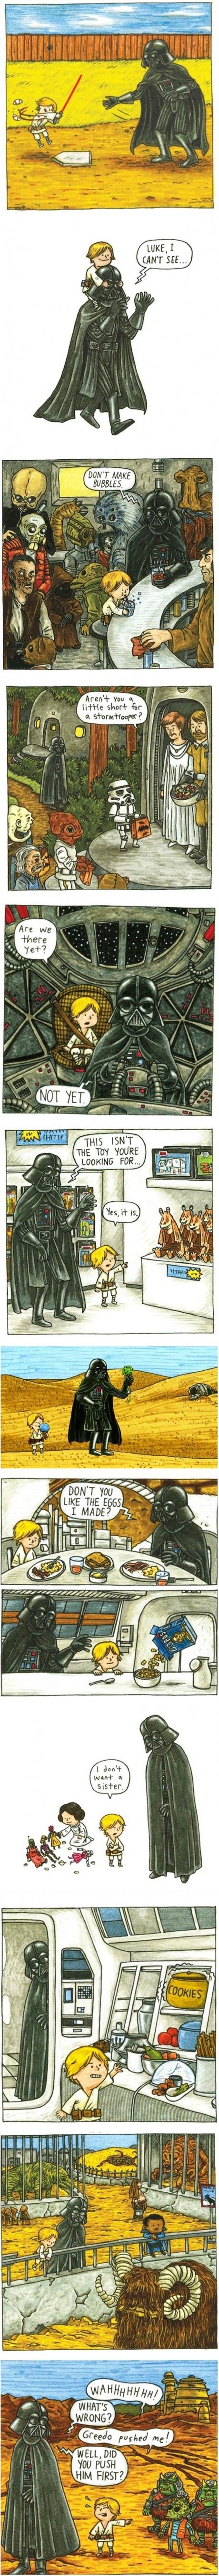 If Darth Vader would have been there.